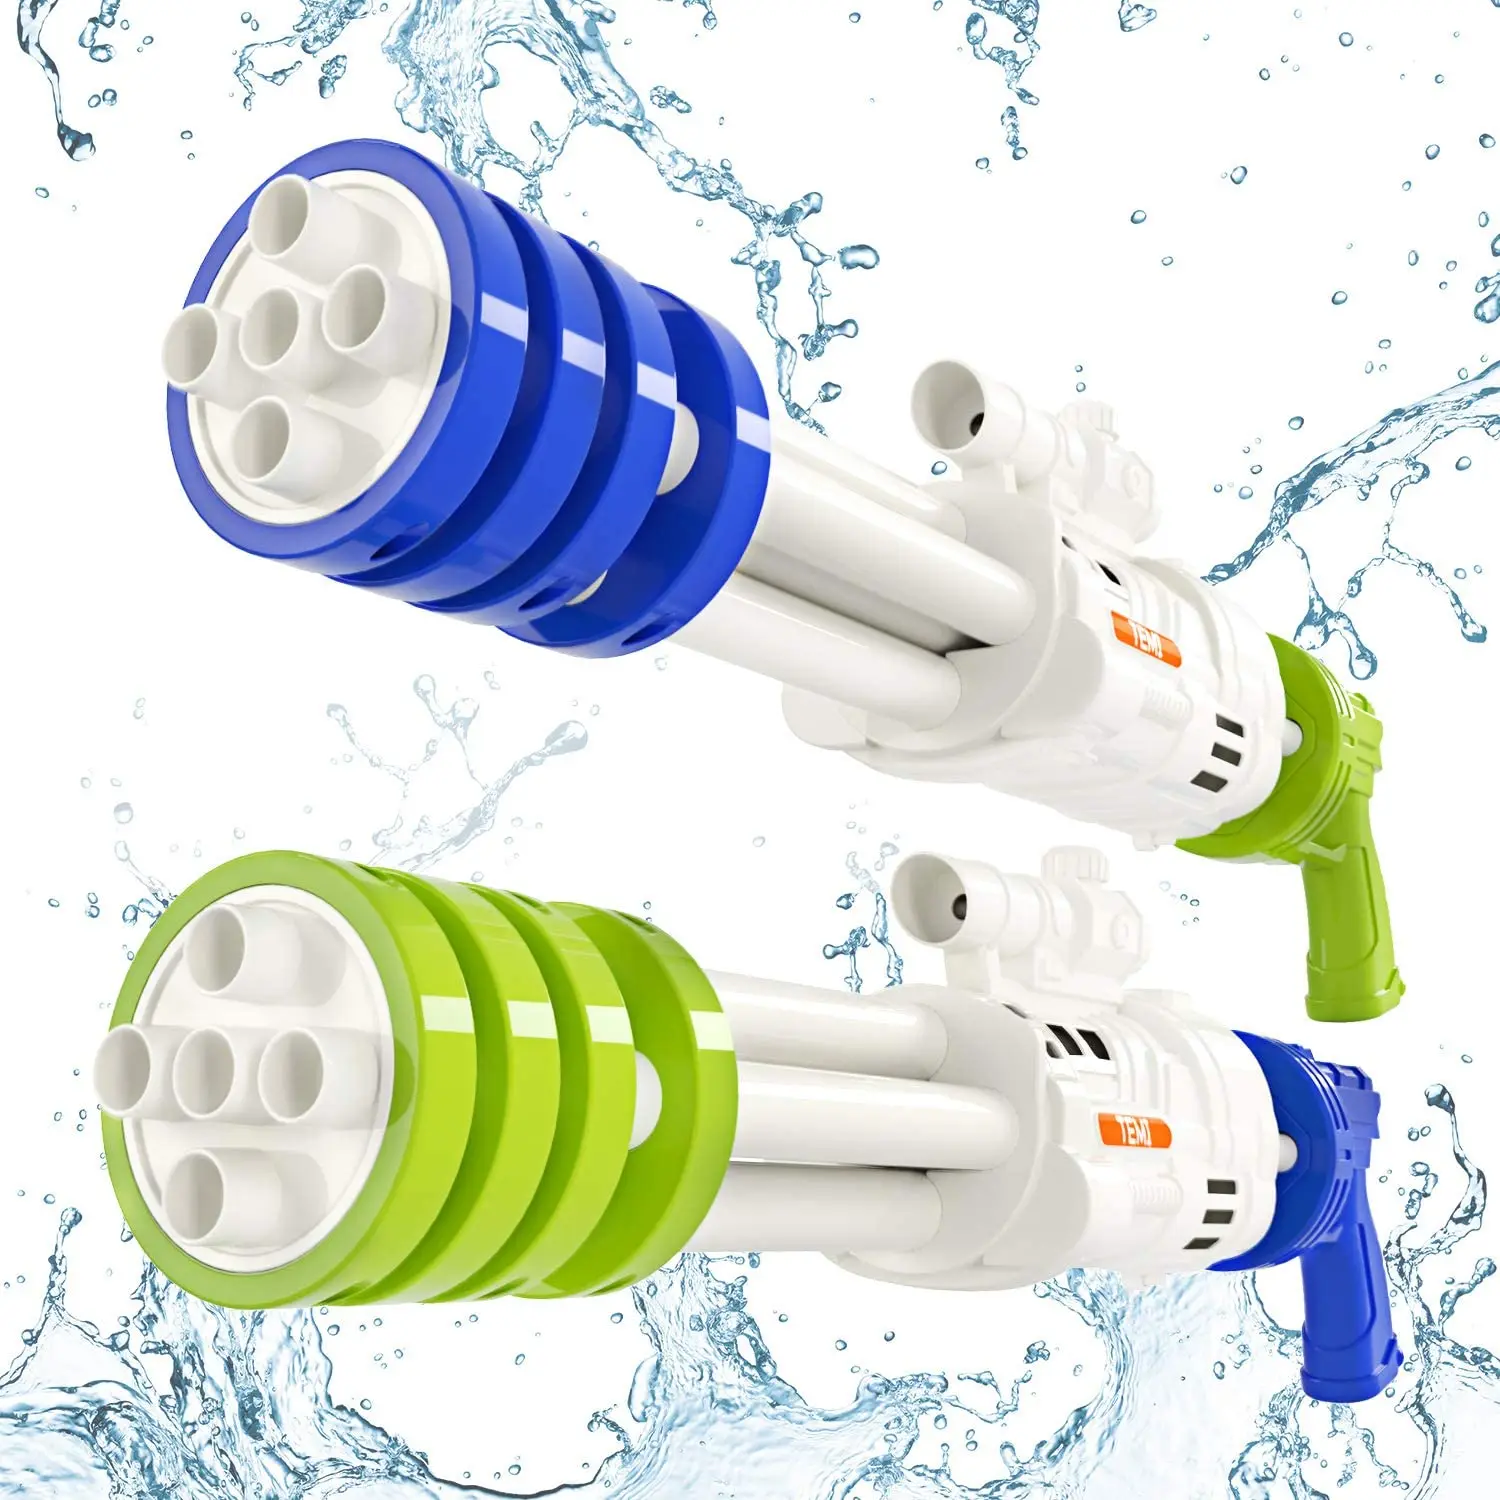 Squirt Water Guns  22.4 Inch Large Water Gun for Outdoor Activities, Pool Toys for Kids and Adults